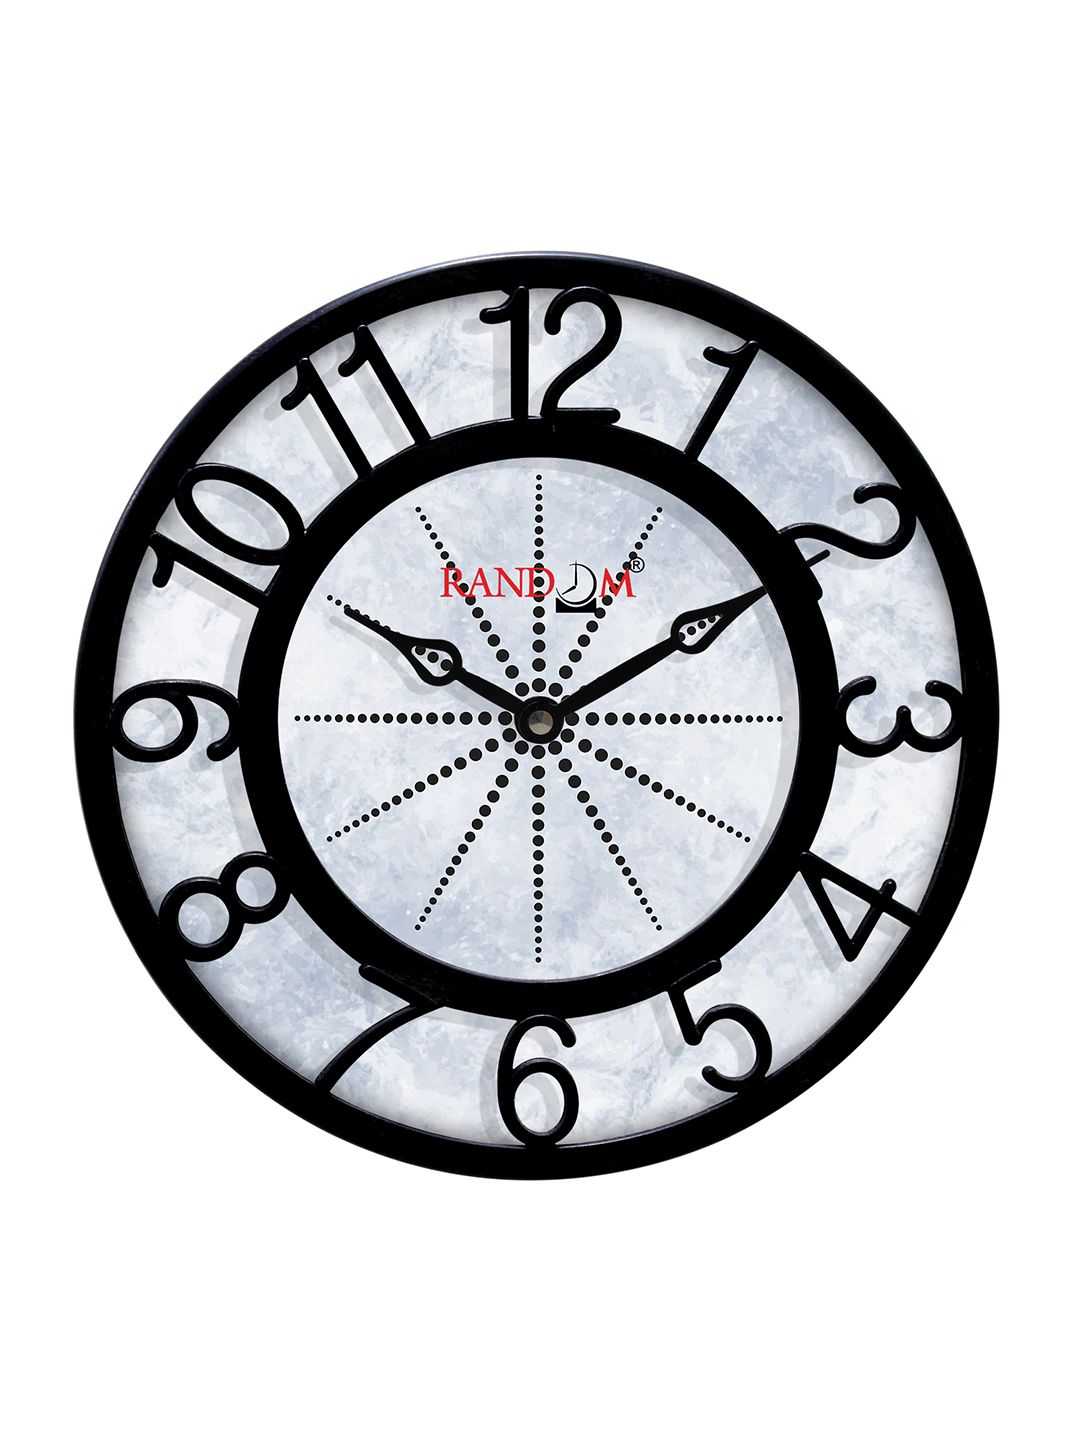 RANDOM Off-White & Black Printed Contemporary 20 cm Table Cum Wall Analogue Clock Price in India